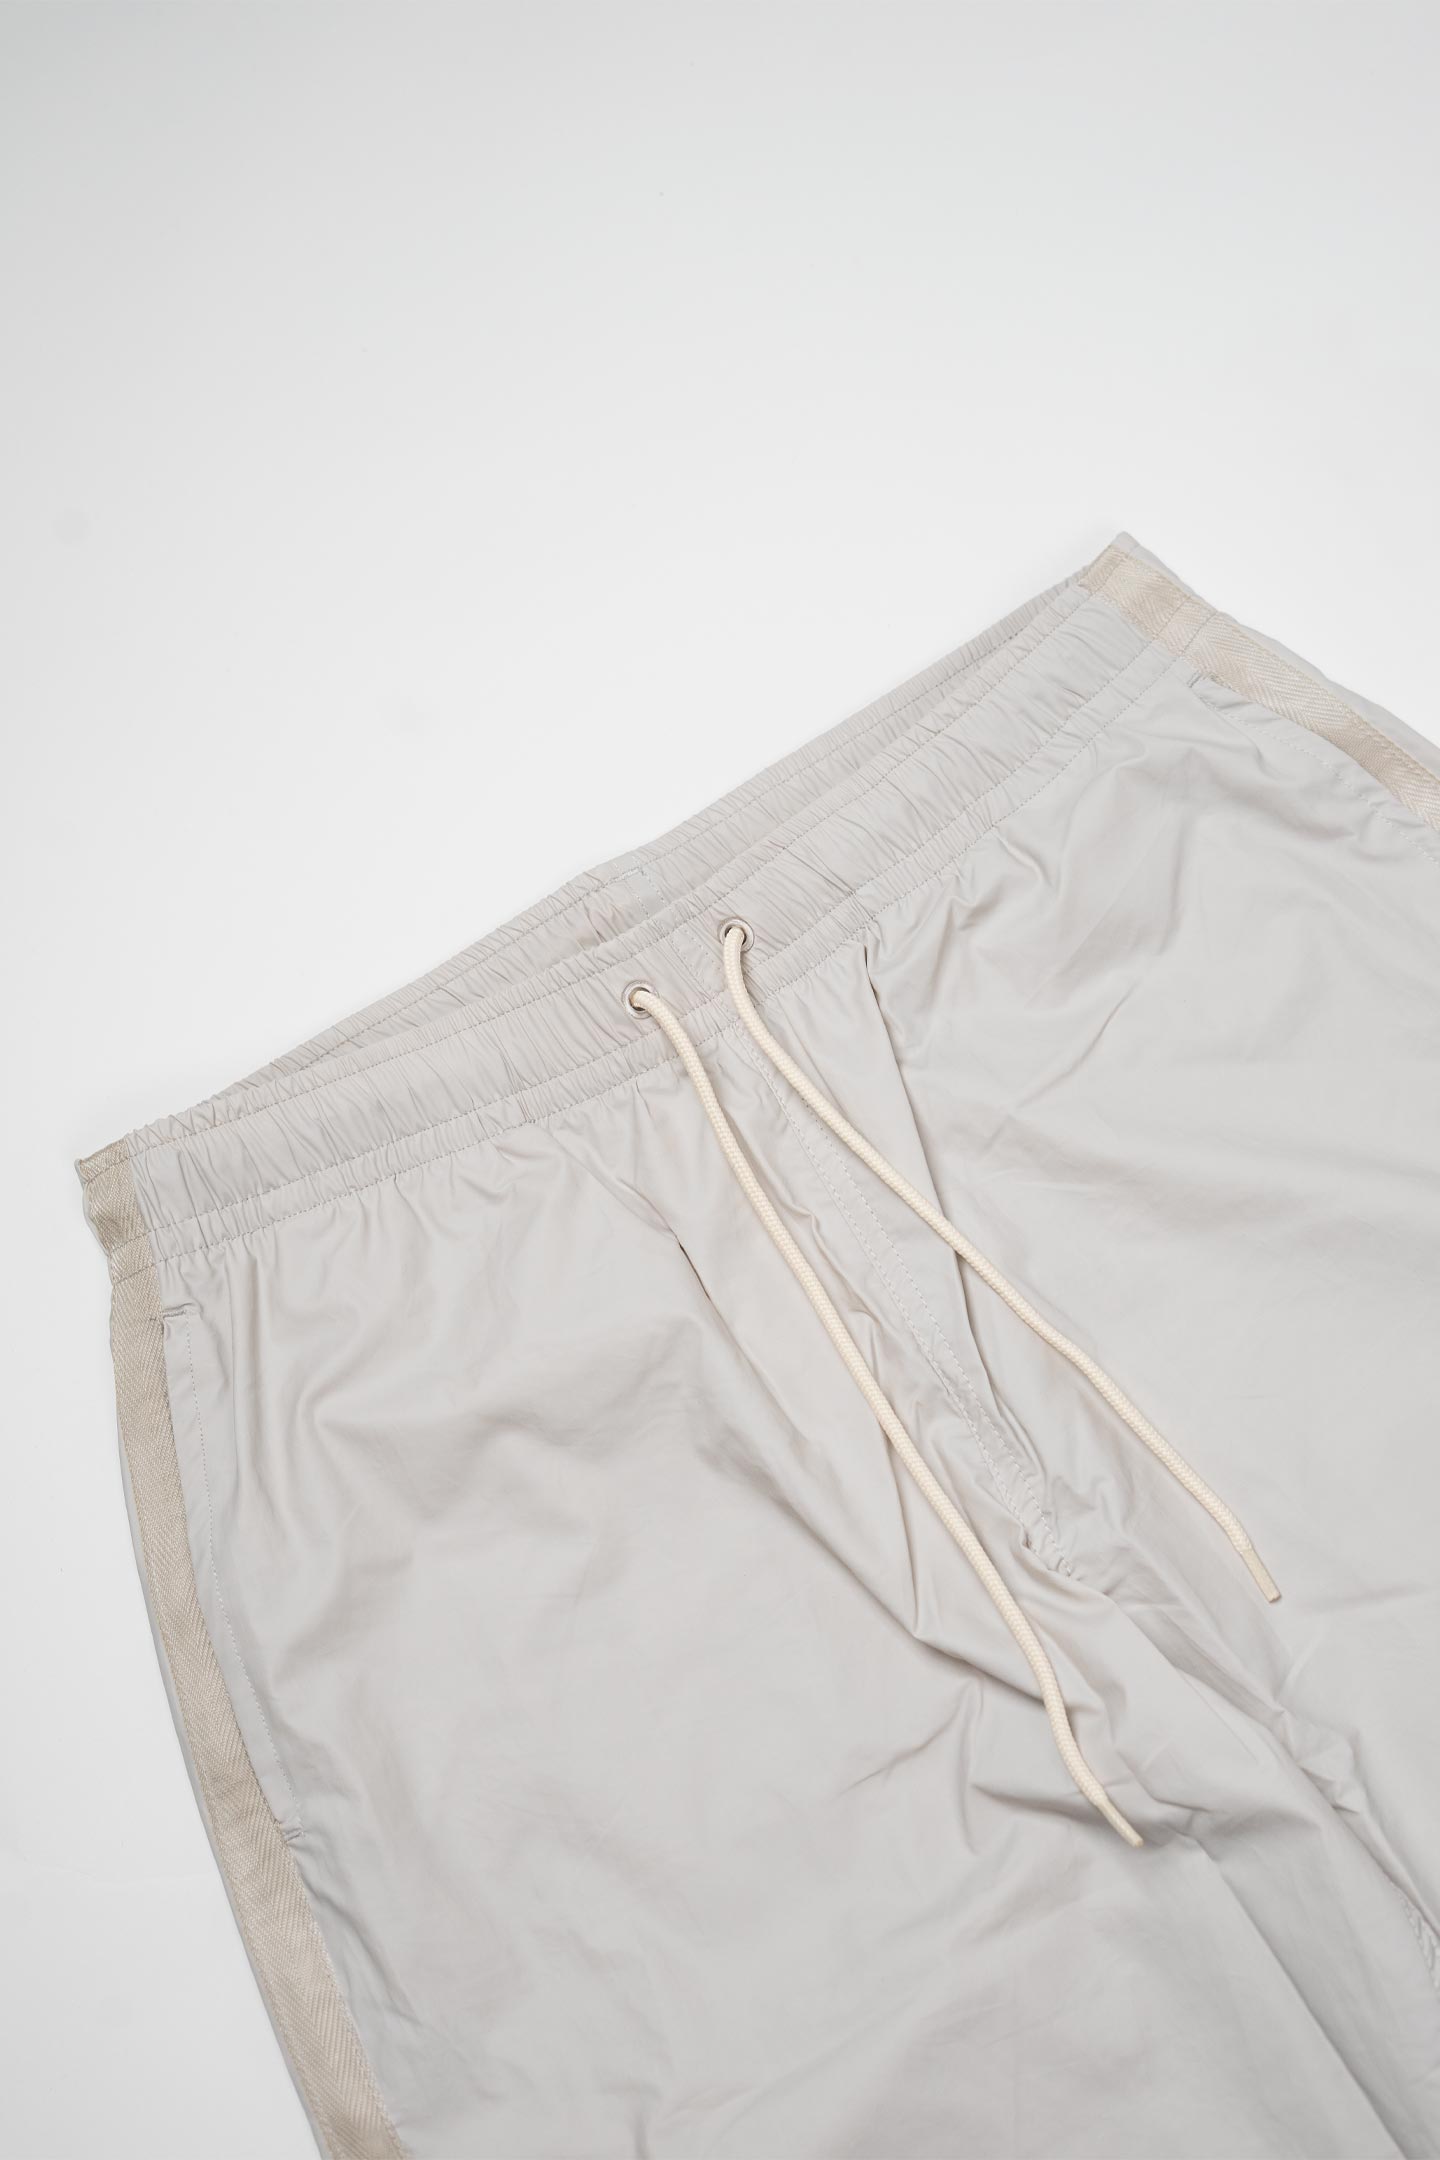 OUR LEGACY SPEED TROUSER LIGHT GREY RUBBERIZE COTTON